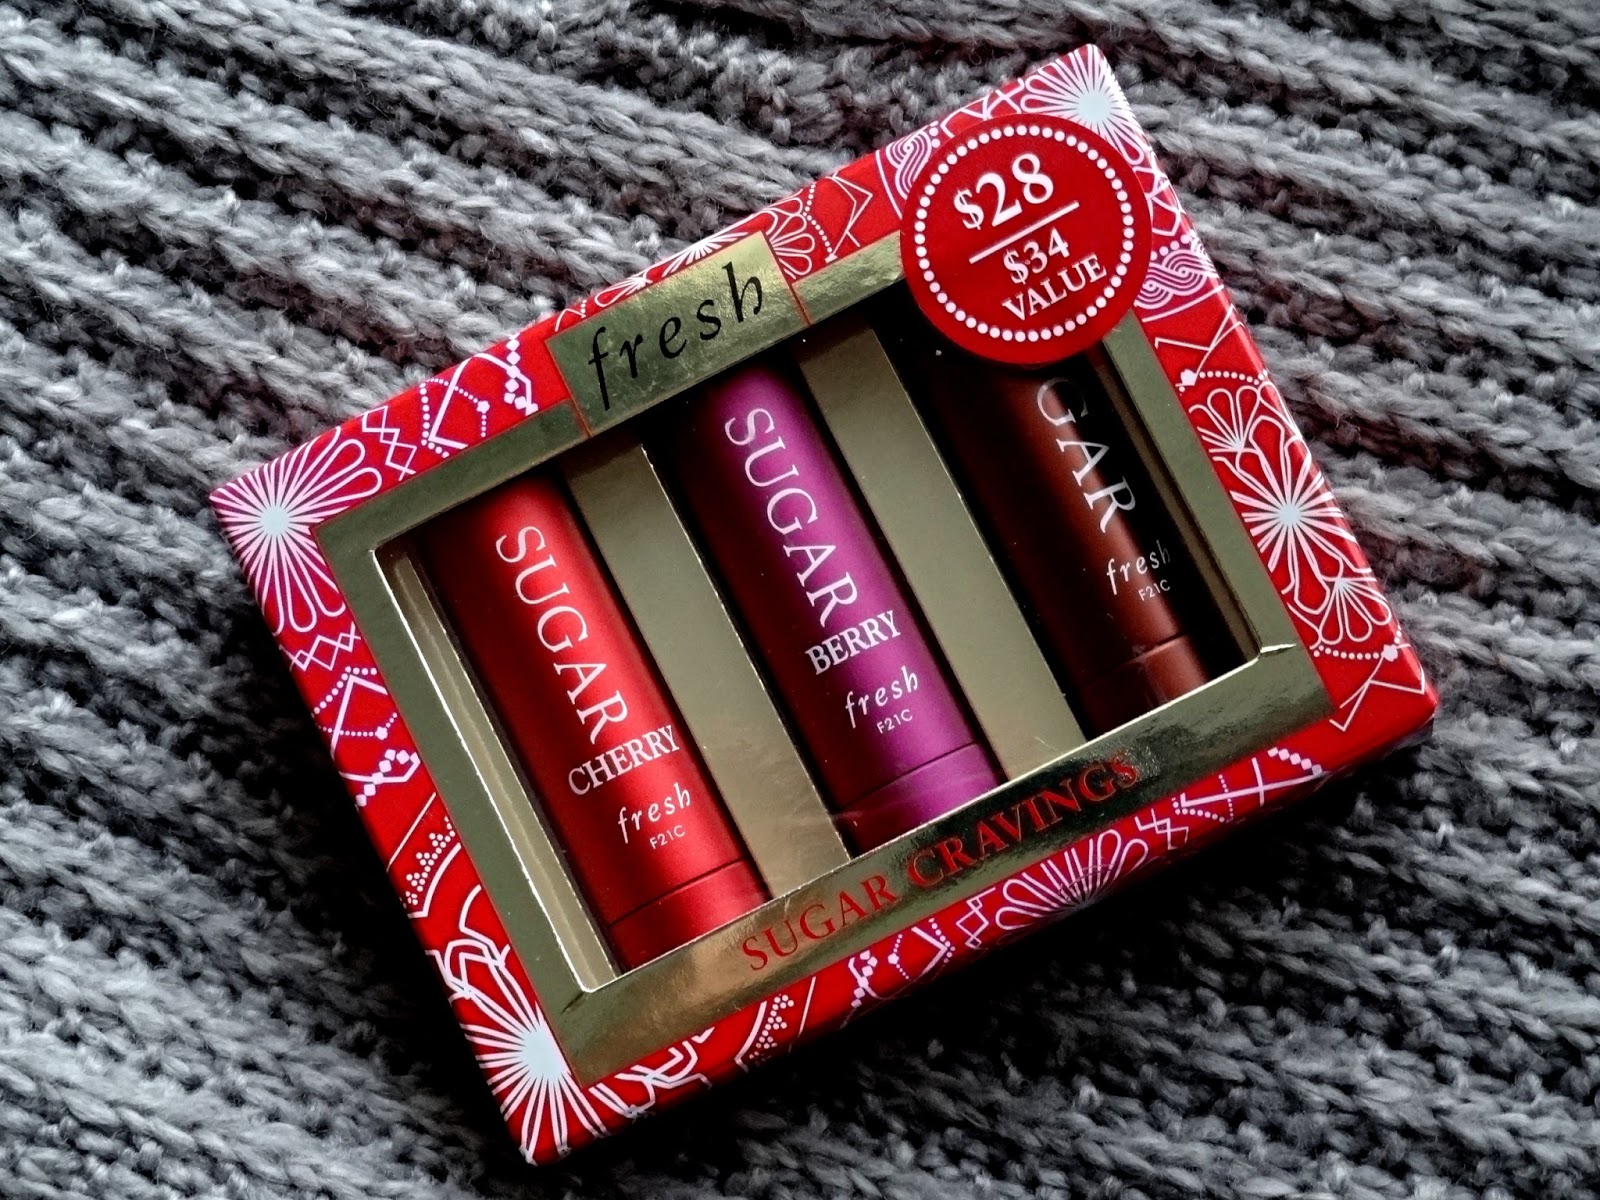 Fresh Sugar Cravings For Holiday 2014 Review, Photos & Swatches